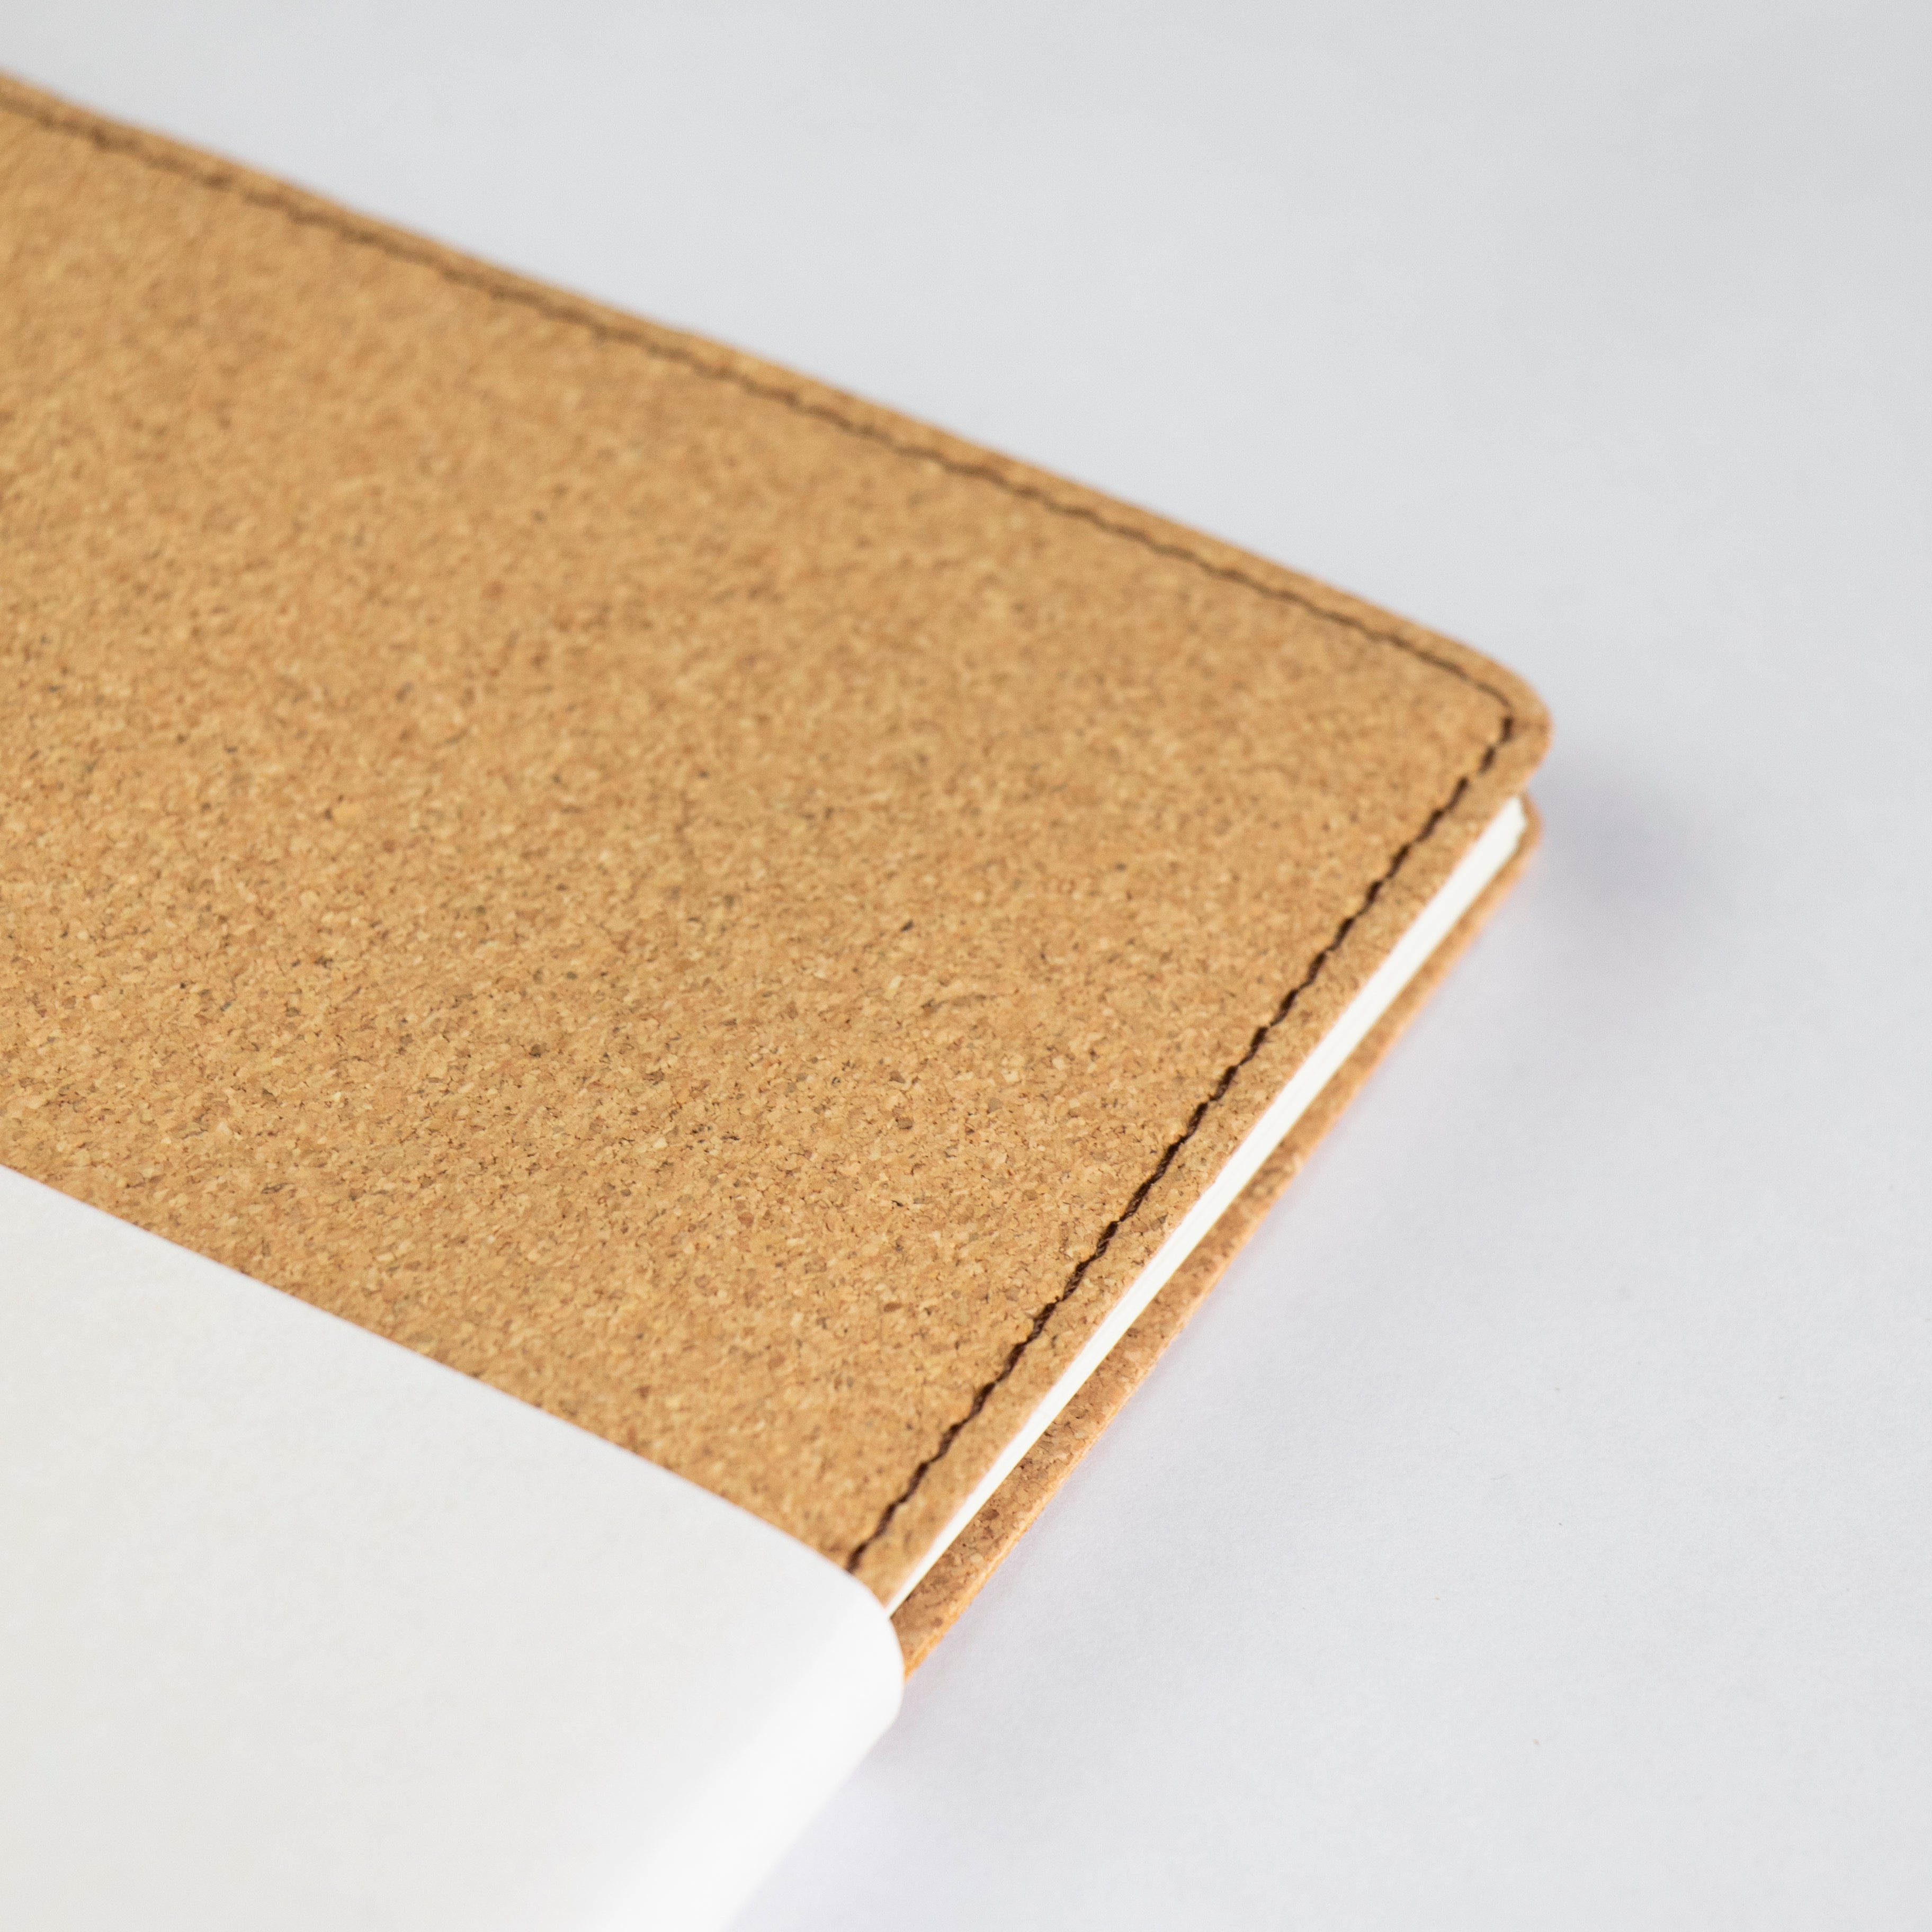 Sand A5 Notebook Cover + Notebook